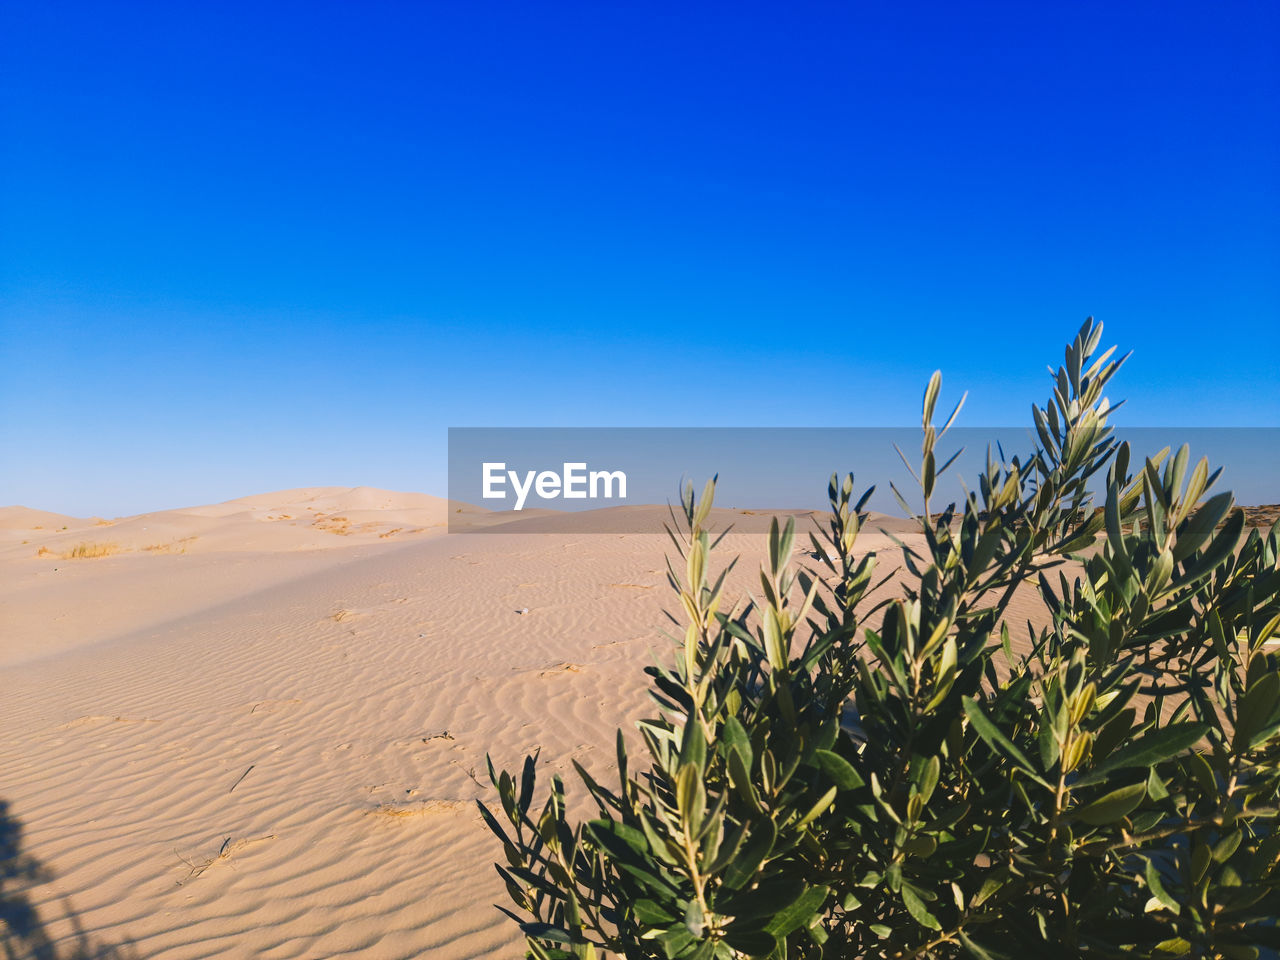 PLANTS GROWING ON SAND AGAINST CLEAR BLUE SKY